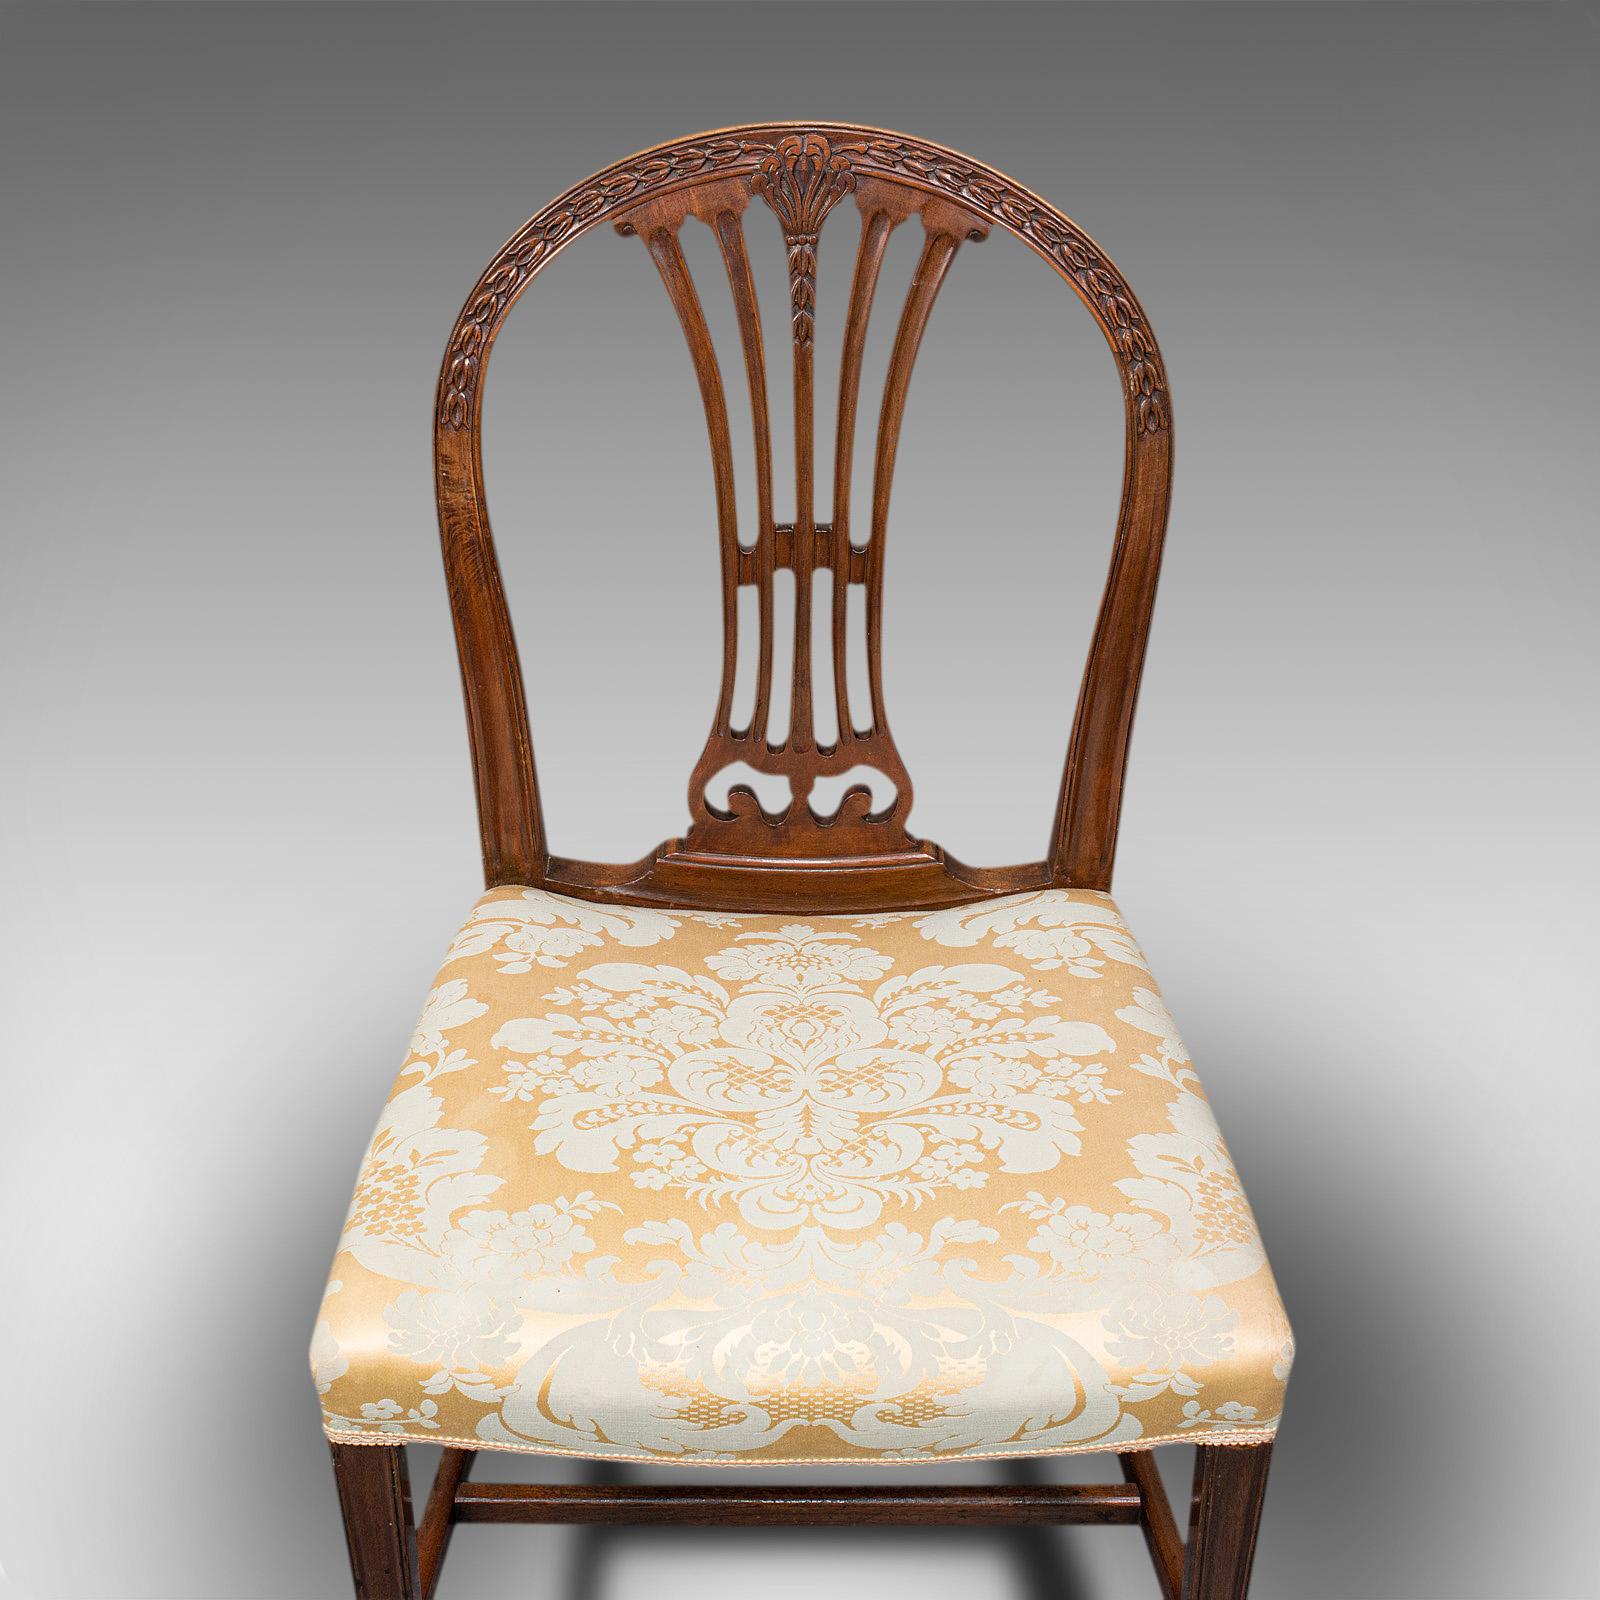 Set of 4 Hepplewhite Revival Chairs, English, Mahogany, Dining Suite, Victorian 2